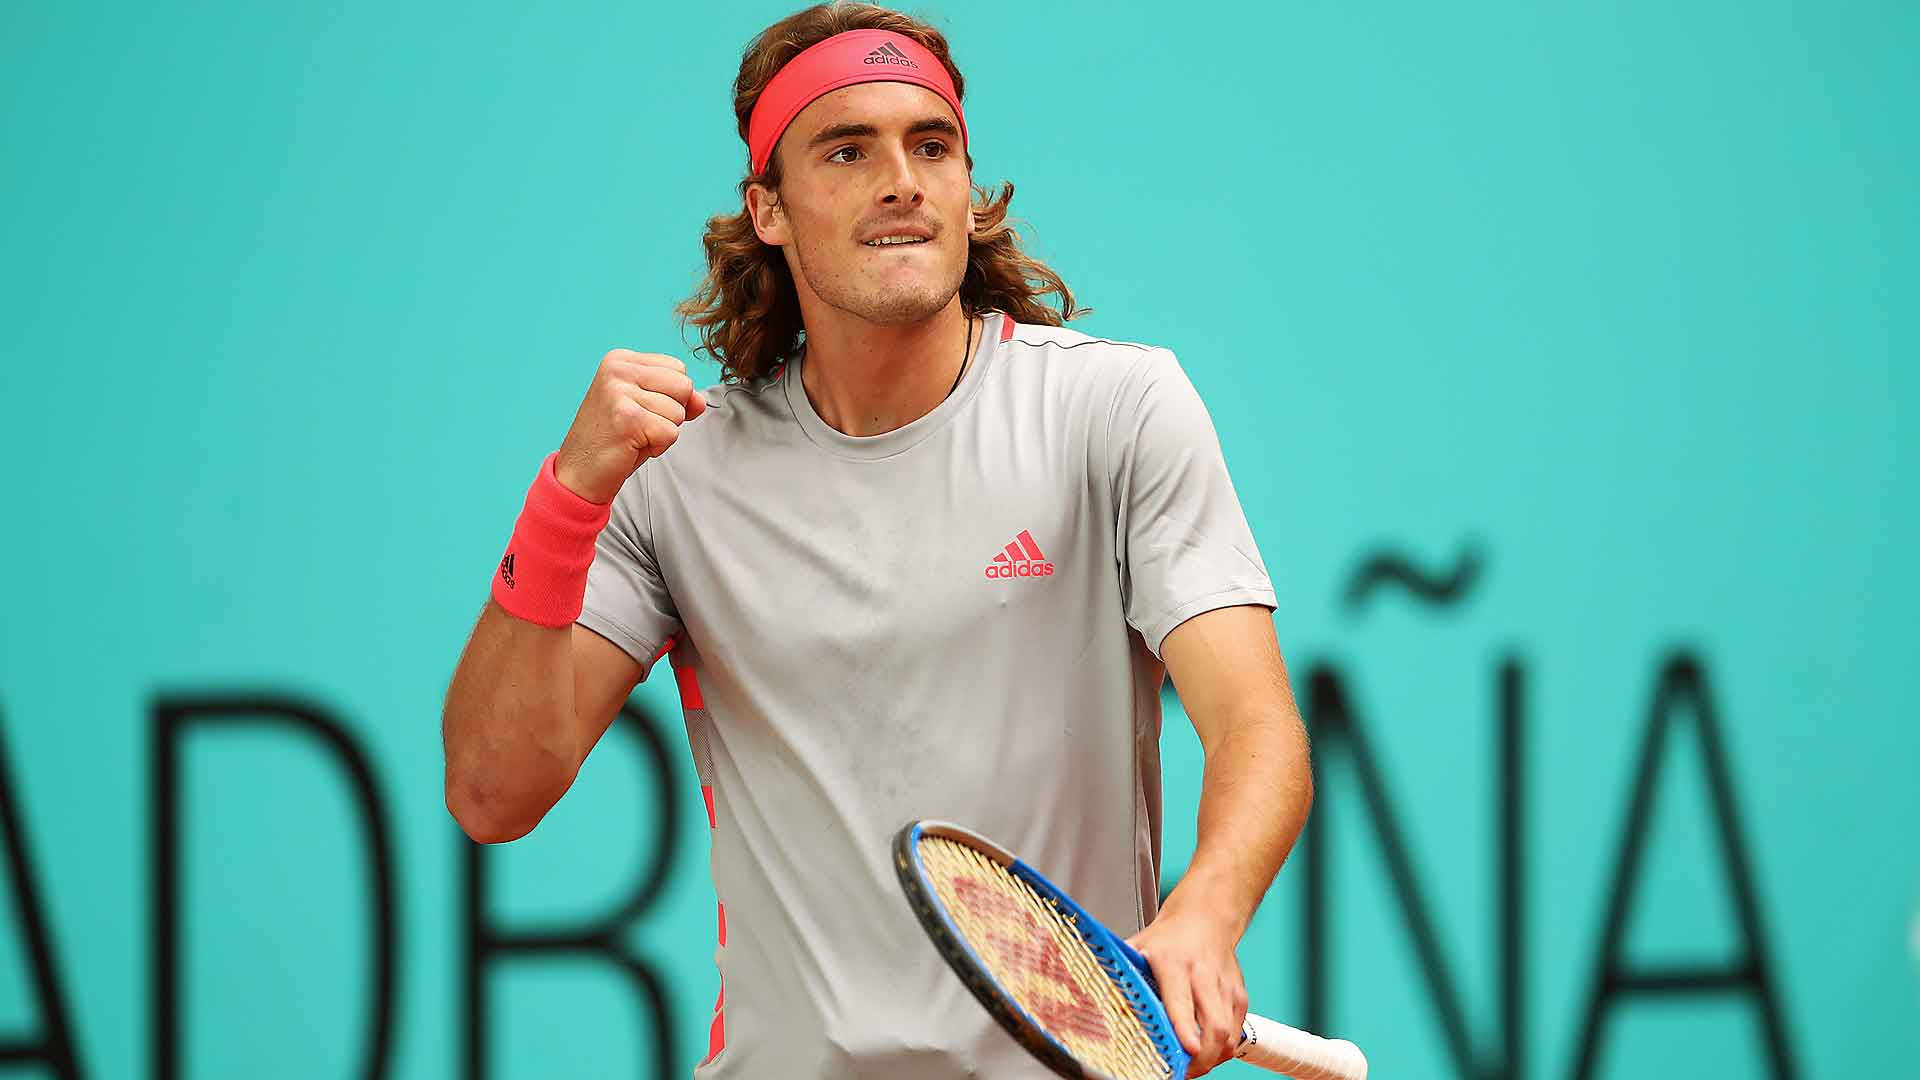 Stefanos Tsitsipas With Clenched Fist Wallpaper